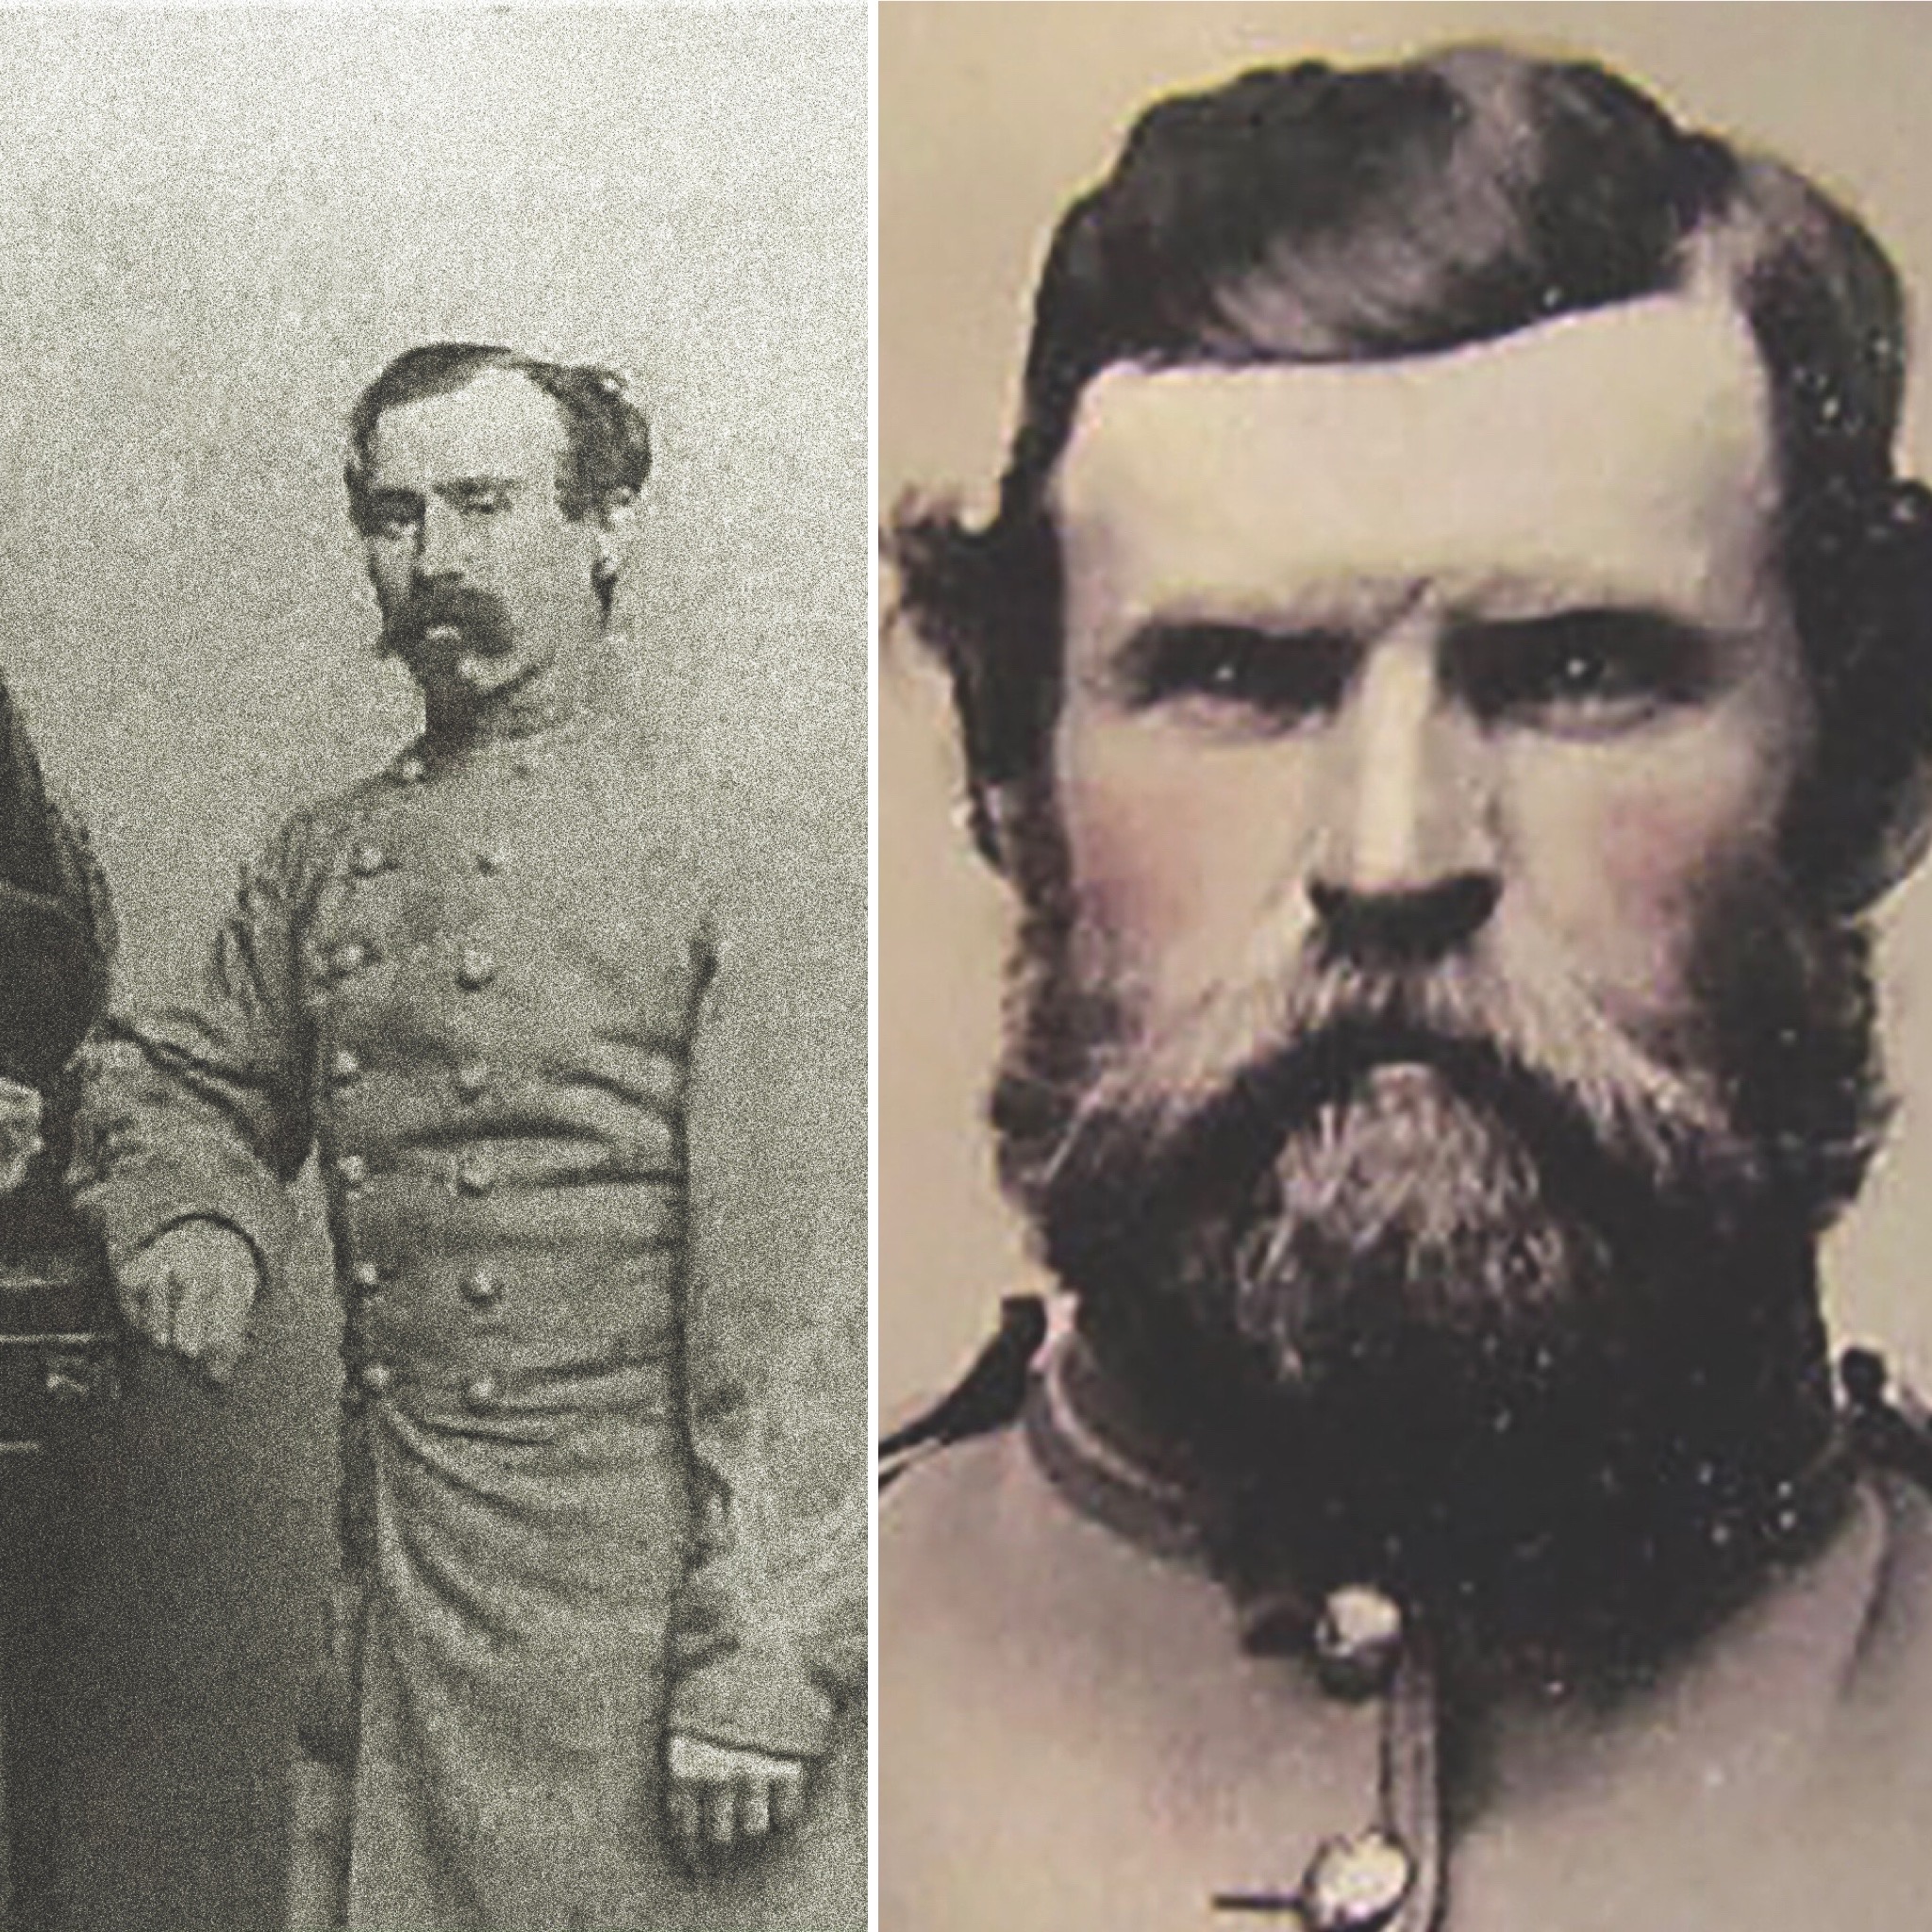 Lt. Col. Emory Best (left), 23rd Georgia, wounded and captured. At right, Private Jobe Gilley, 27th Indiana, wounded in the chest. (Courtesy of Richard Thompson)